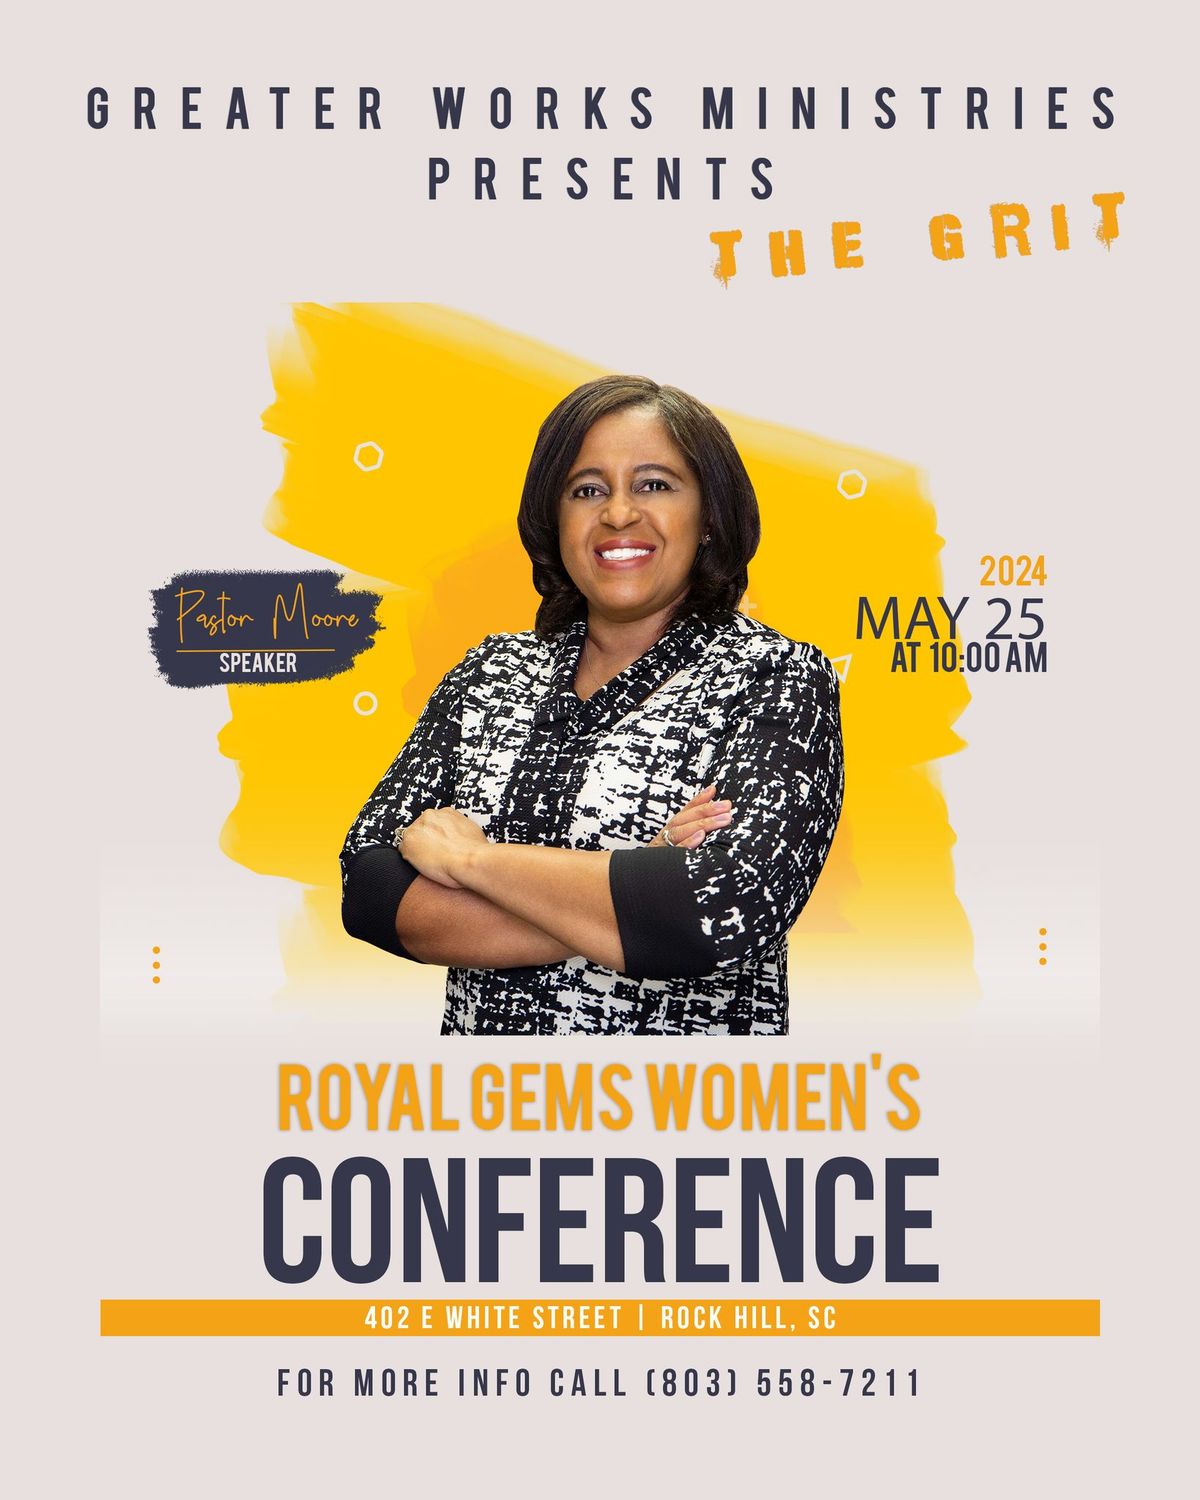 Royal Gems Women's Conference: THE GRIT